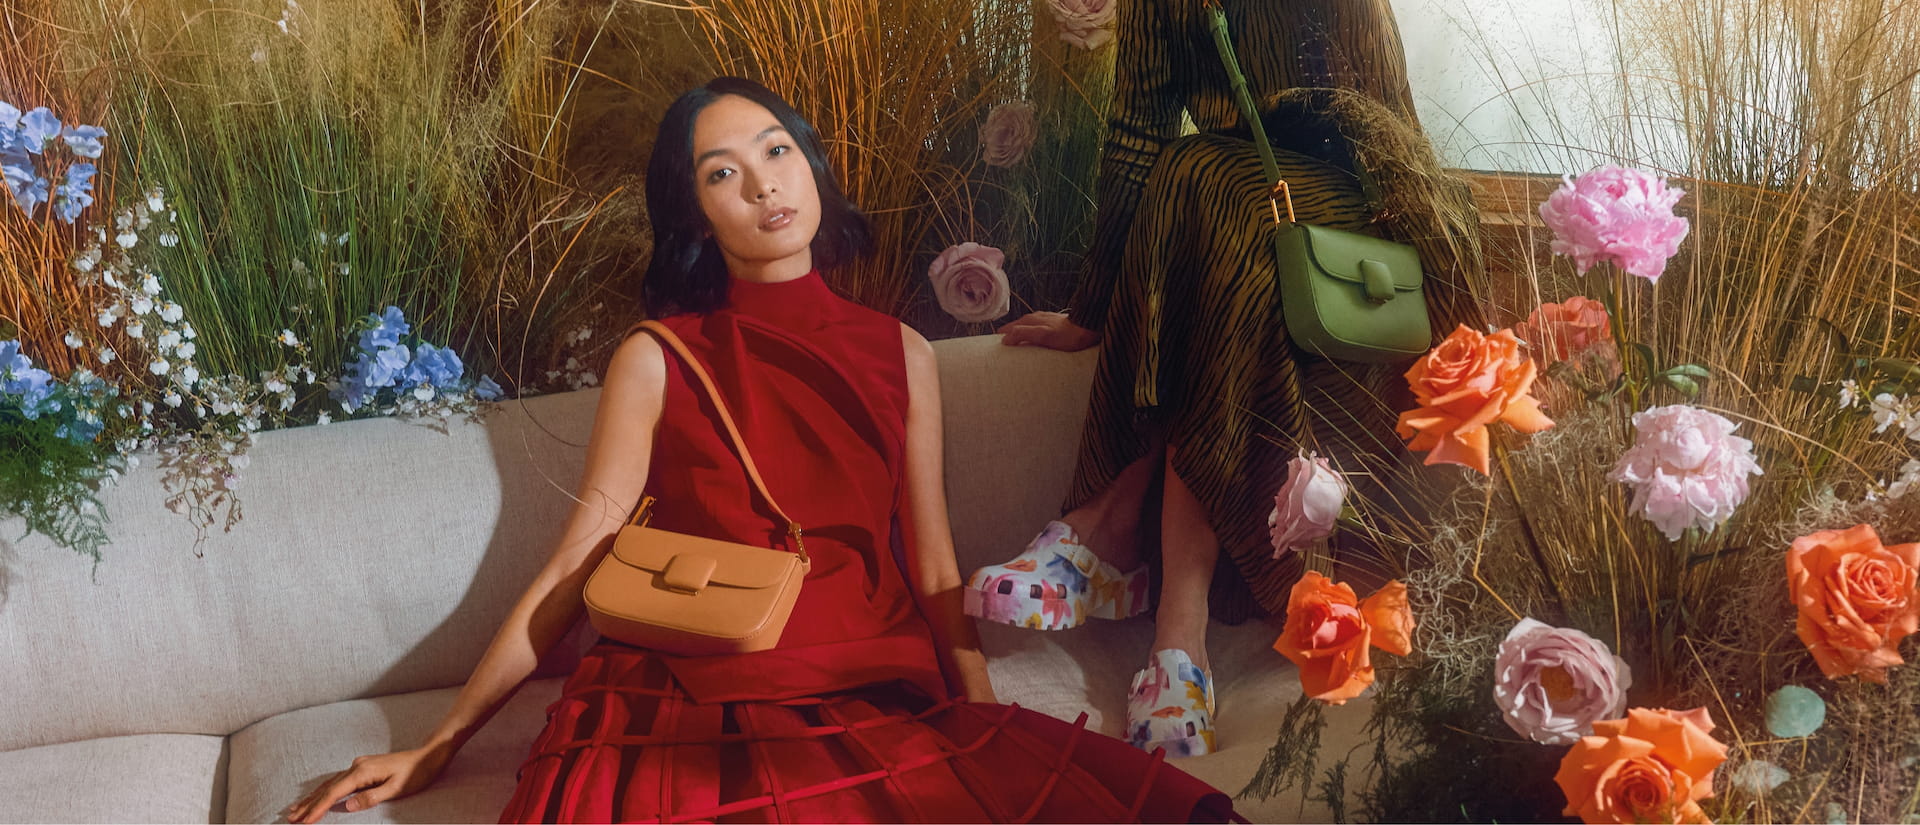 Spring 2022 Trends: Textured Bags - CHARLES & KEITH US